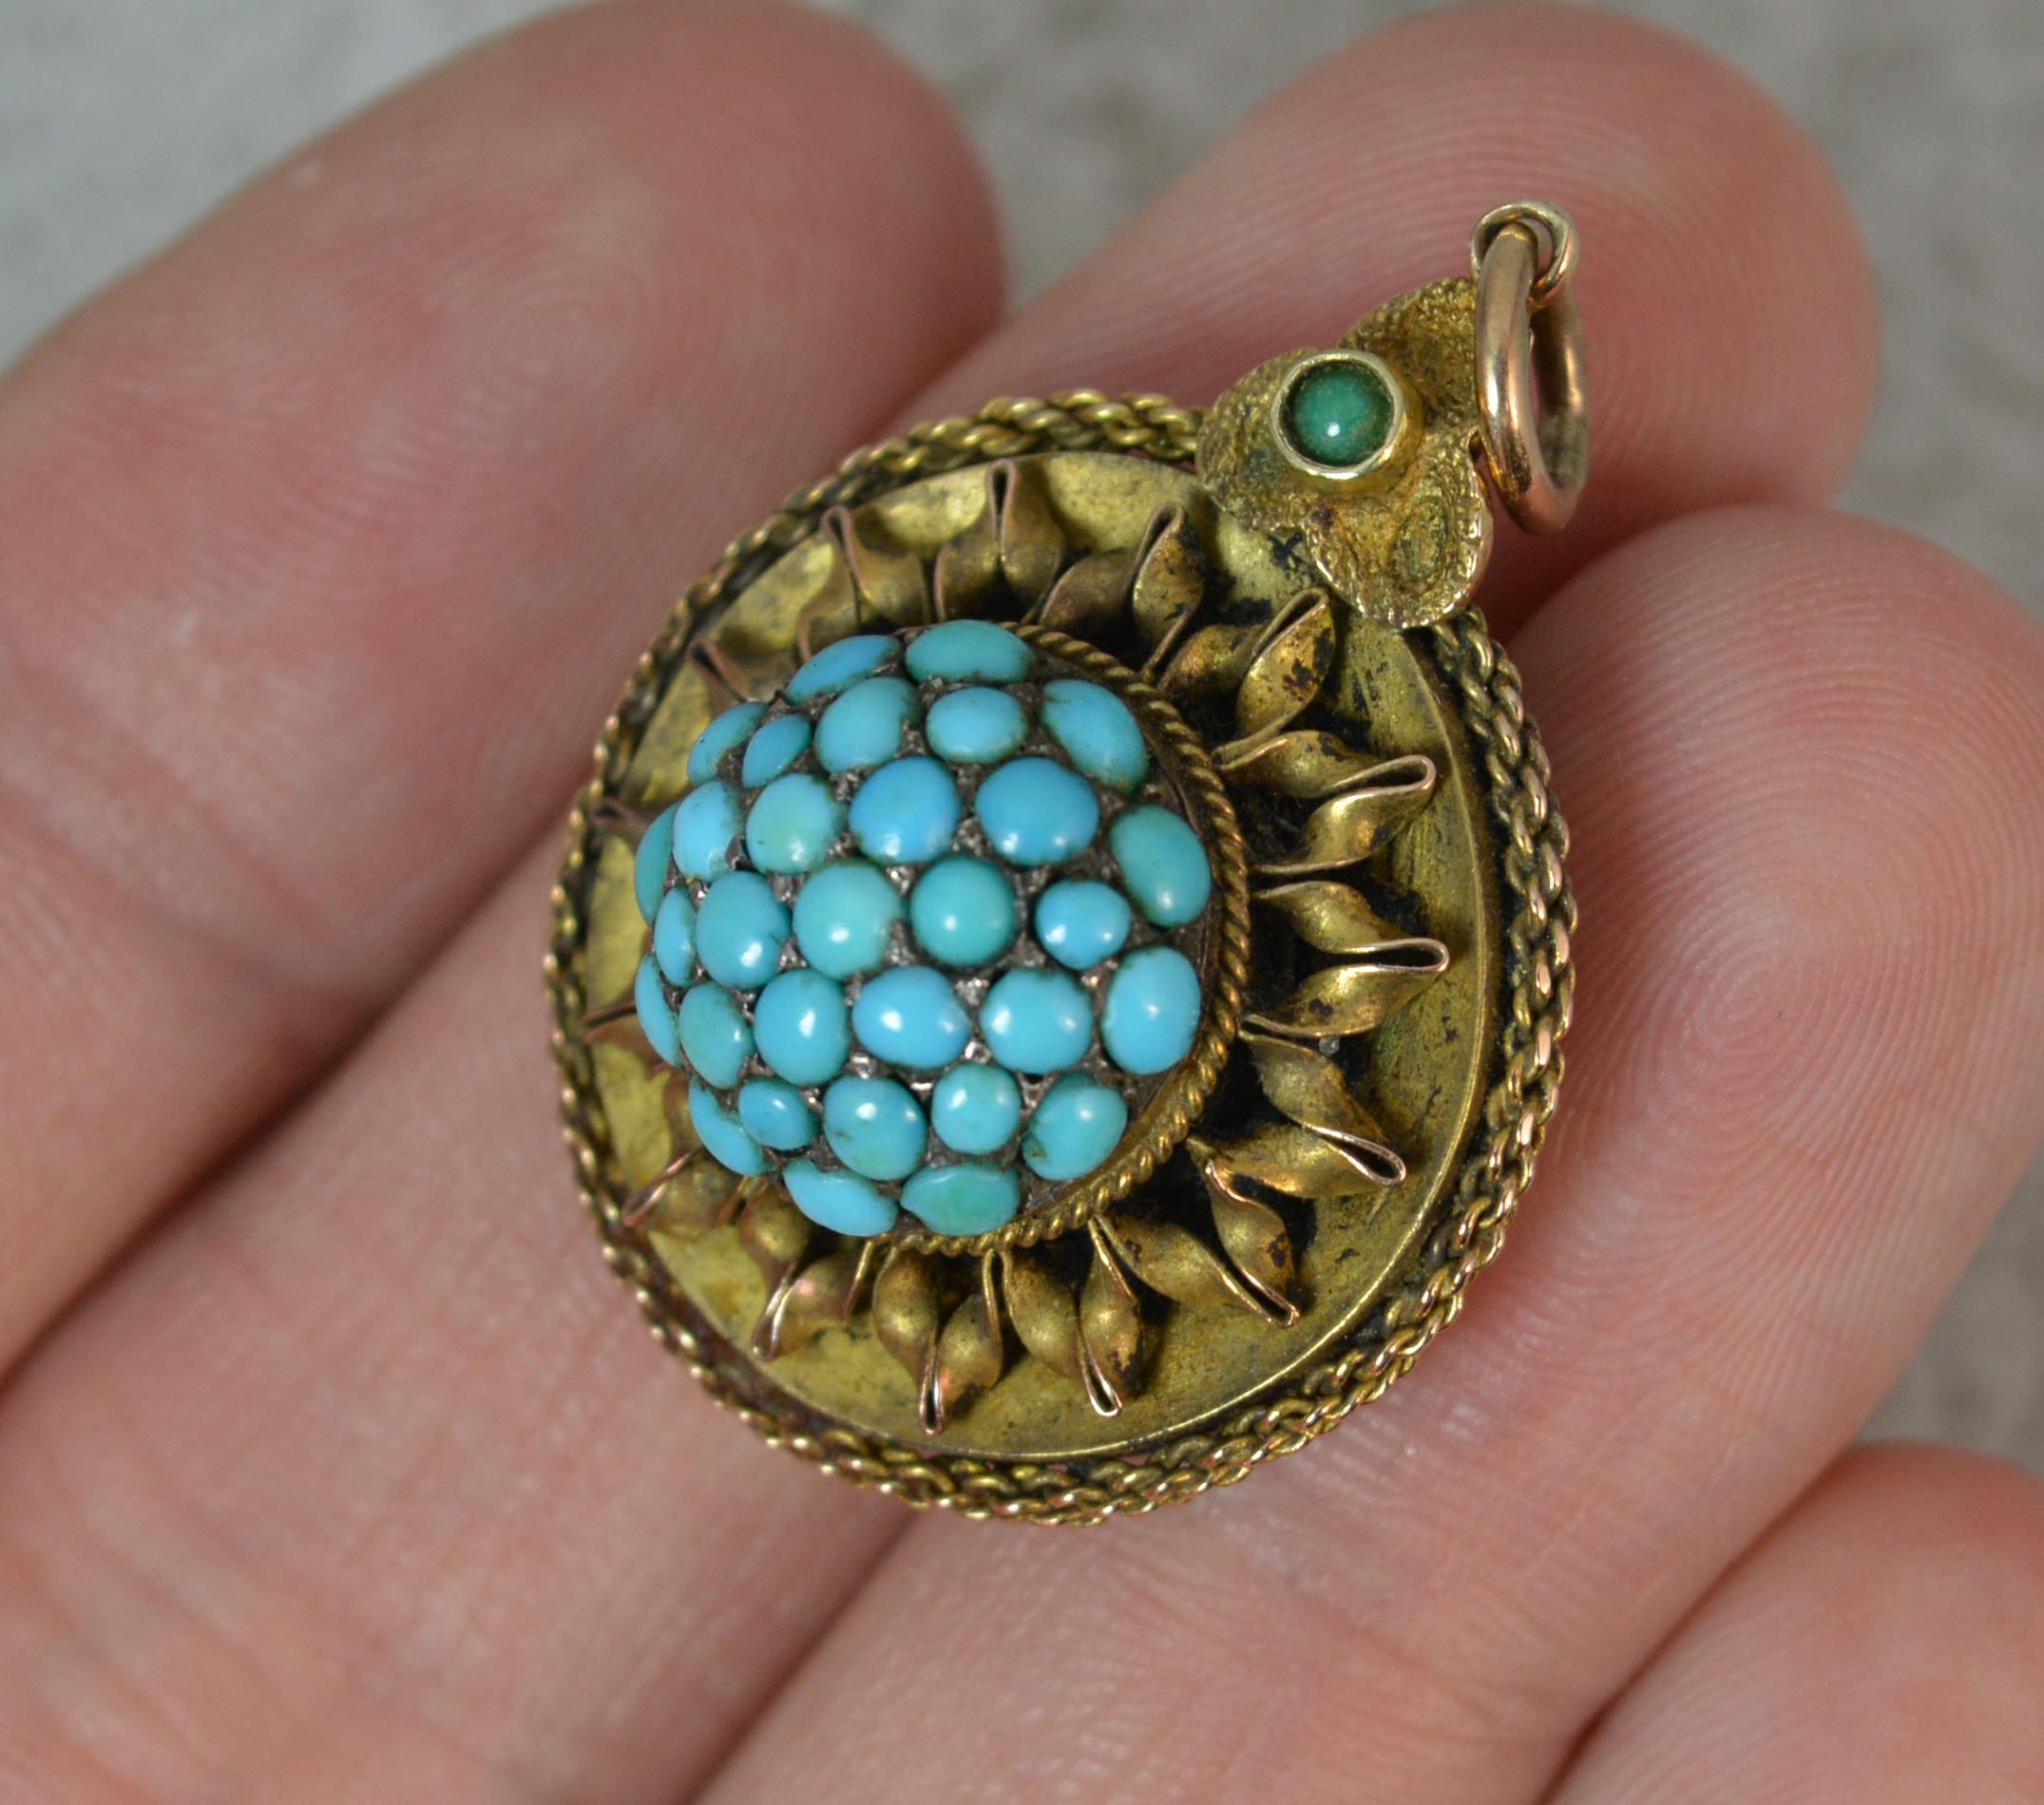 A fantastic early to mid Victorian pendant.
Modelled in 15 carat yellow gold throughout.
Designed with a pave set bombe cluster of turquoise stones to centre with a petal like gold surround and twist link edge. Complete with locket